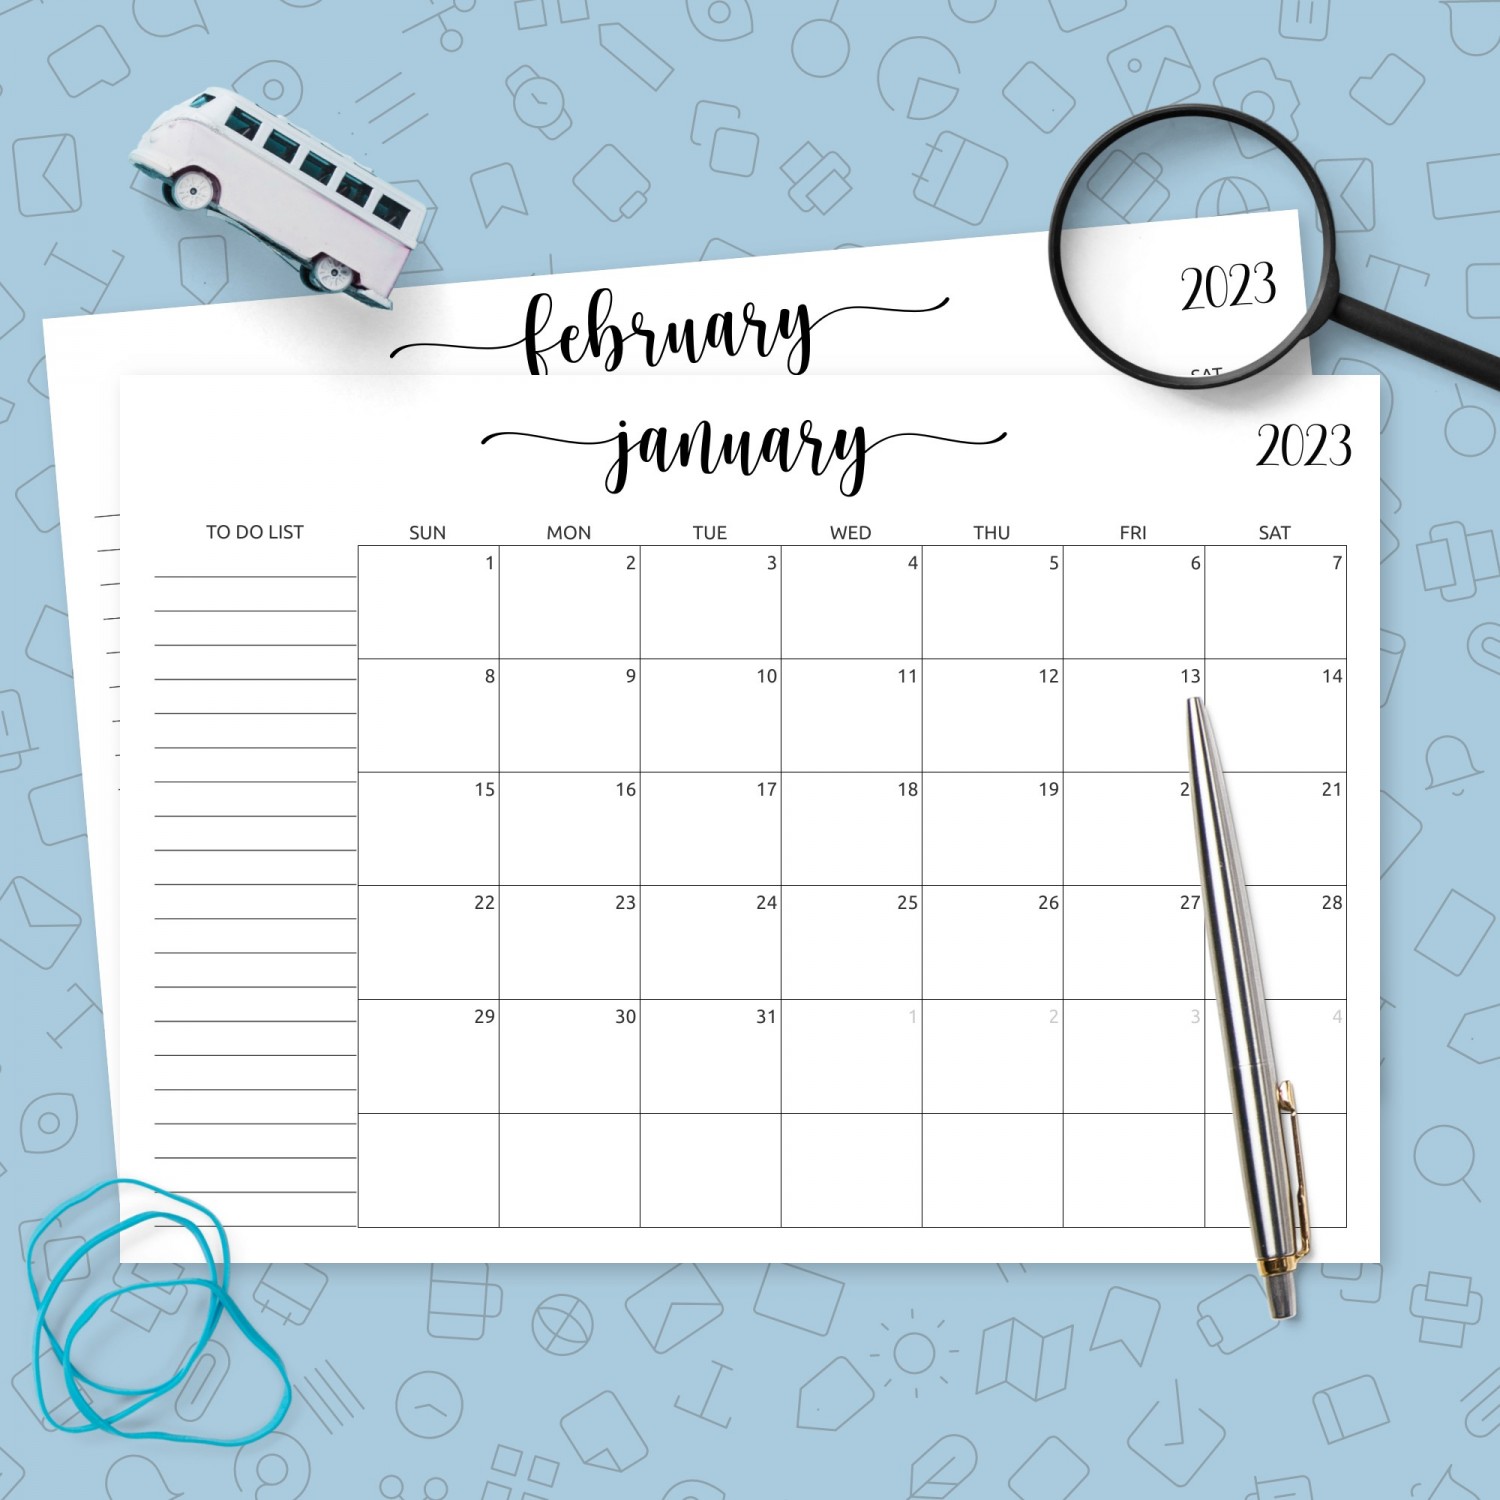 Monthly Calendar with To-Do List Template - Printable PDF